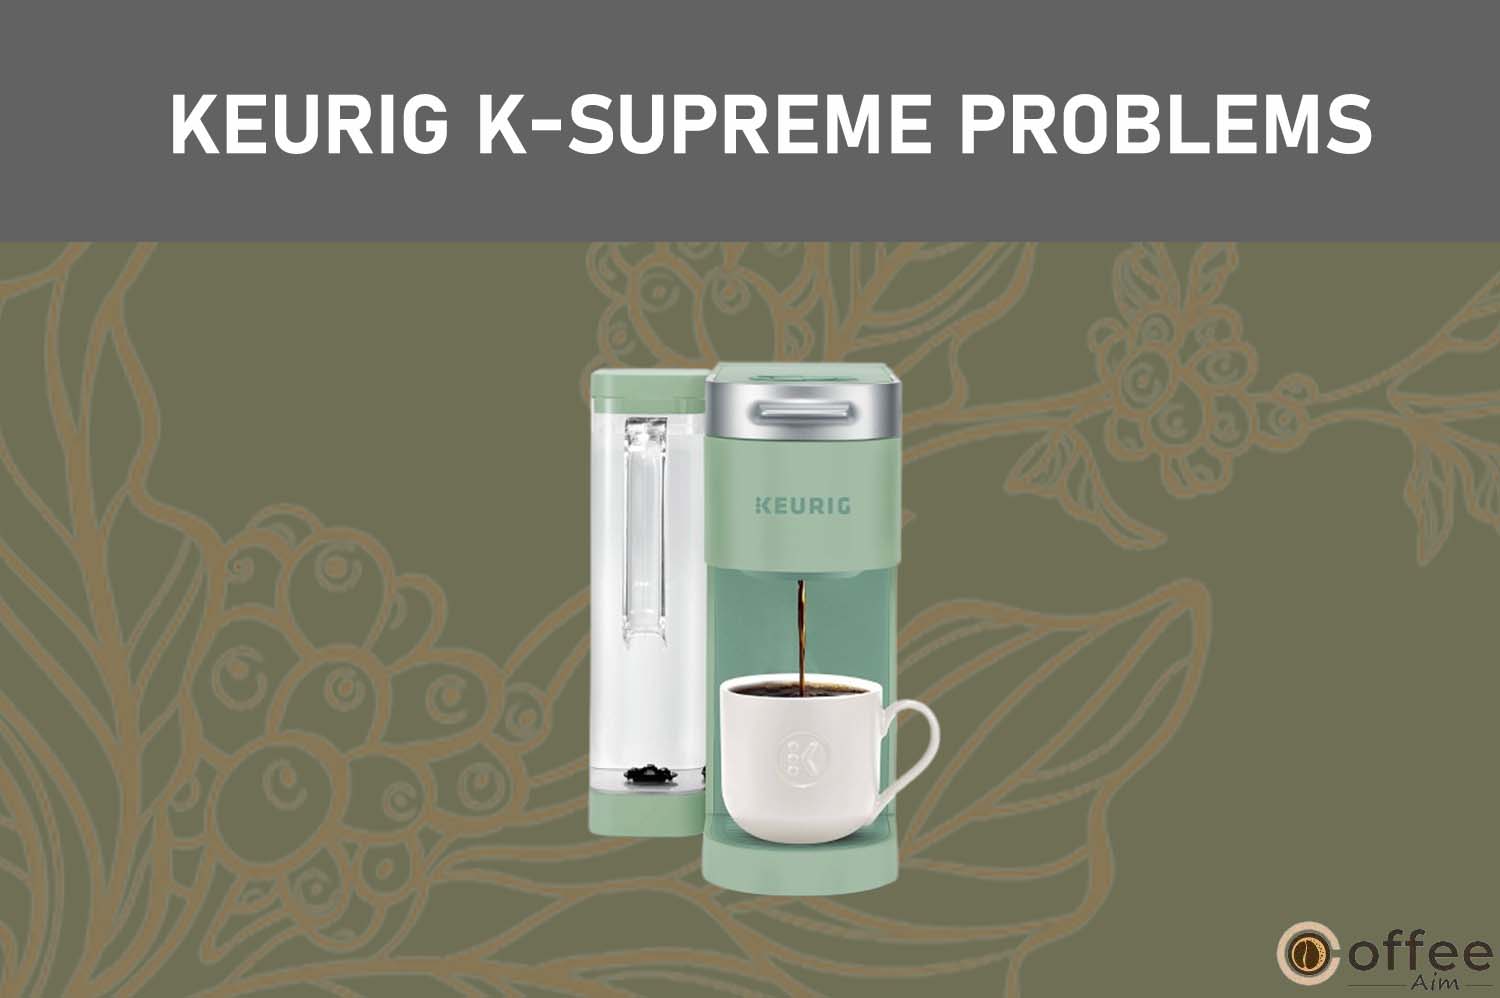 Feature image for the article "Keurig K-Supreme Problems"